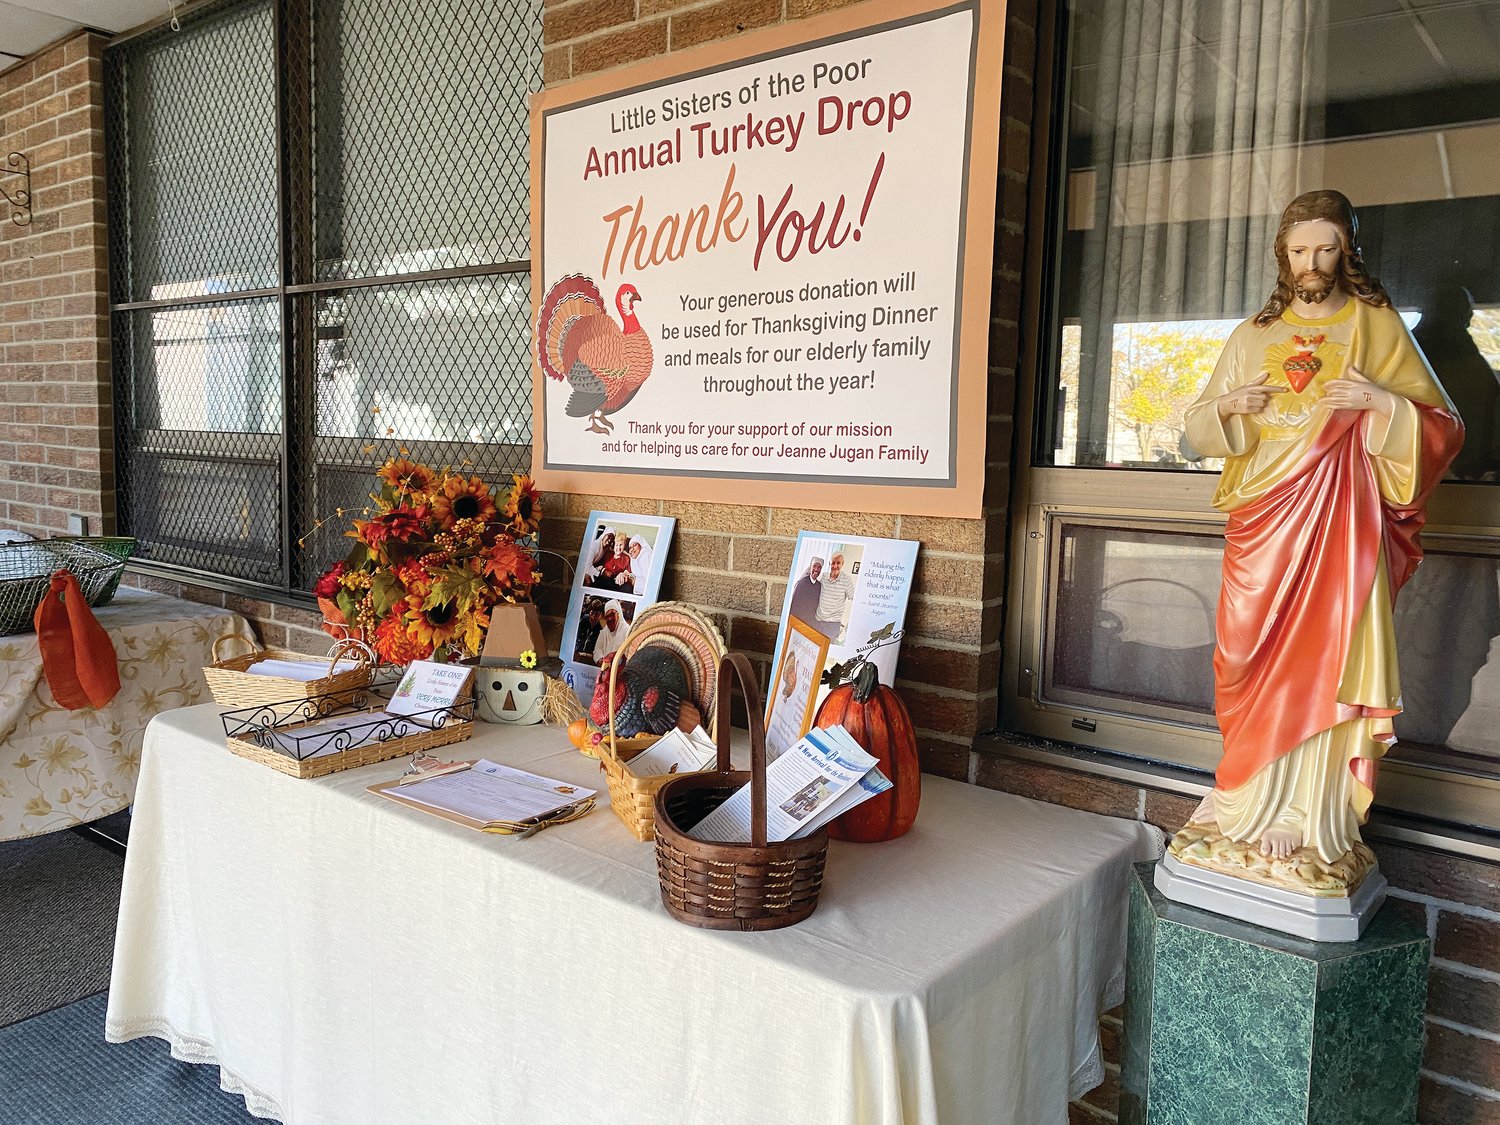 Each year, the Little Sisters of the Poor humbly request donations during their annual Turkey Drop at Jeanne Jugan Residence, Pawtucket. Each day, from Nov. 13-19, the Sisters gratefully accepted generous donations of frozen turkeys which will be prepared for Thanksgiving Dinner and for resident meals throughout the year.